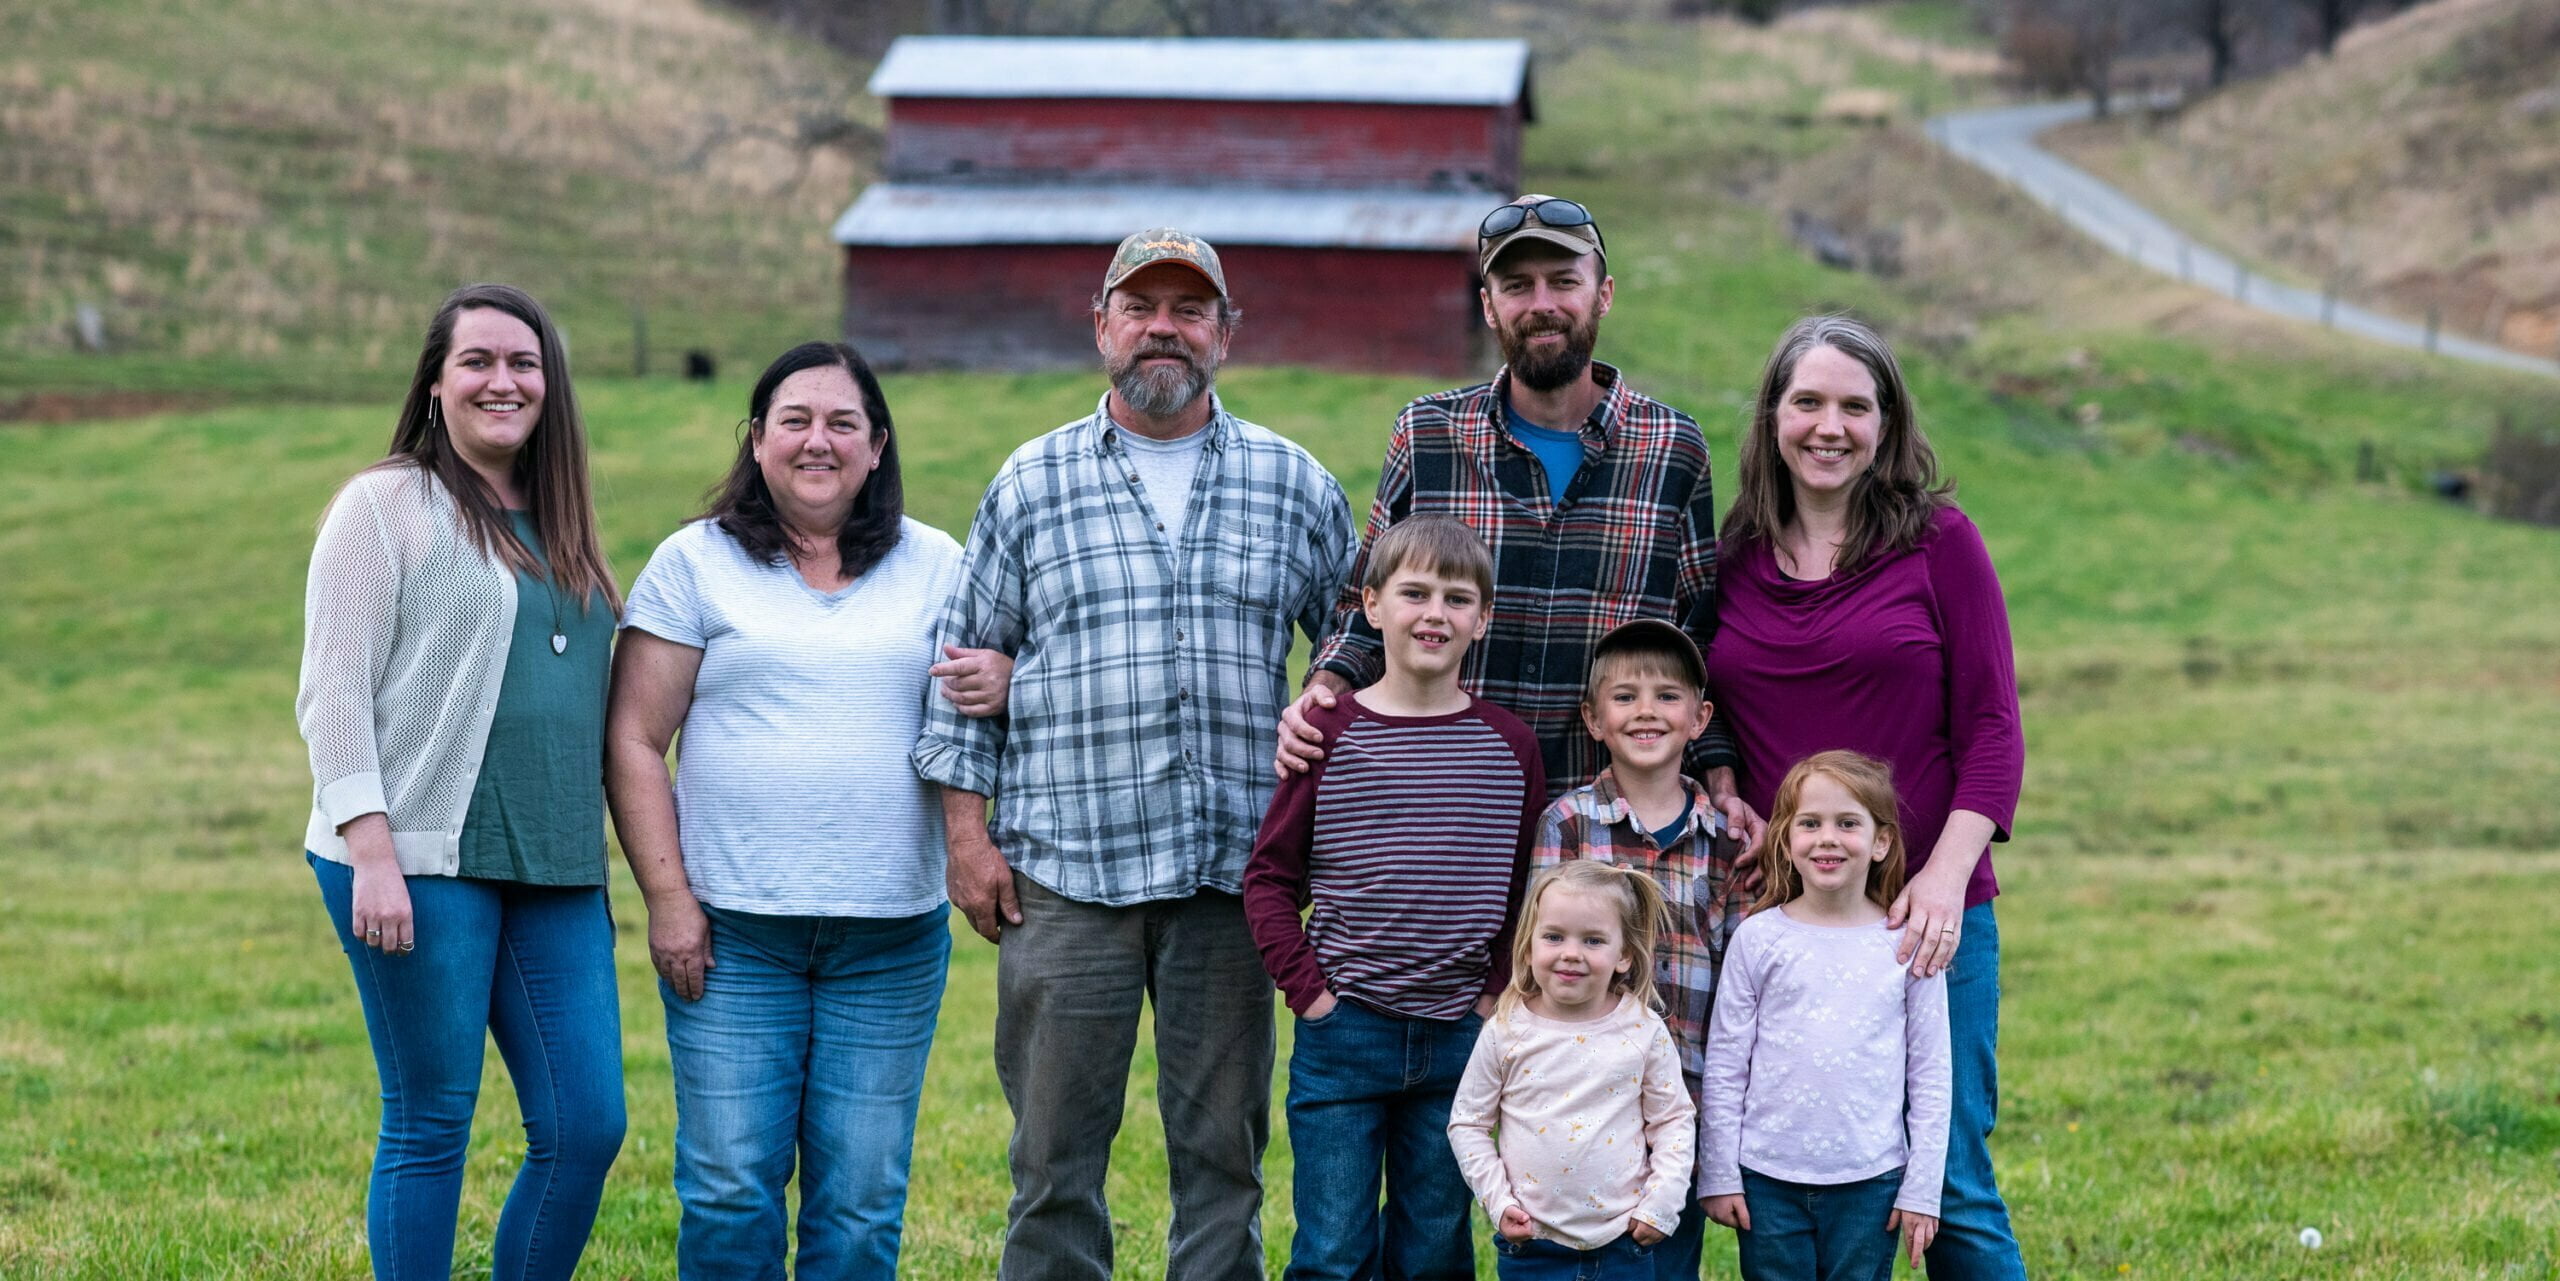 The Dillingham Family, photo by Hannah Furgiuele